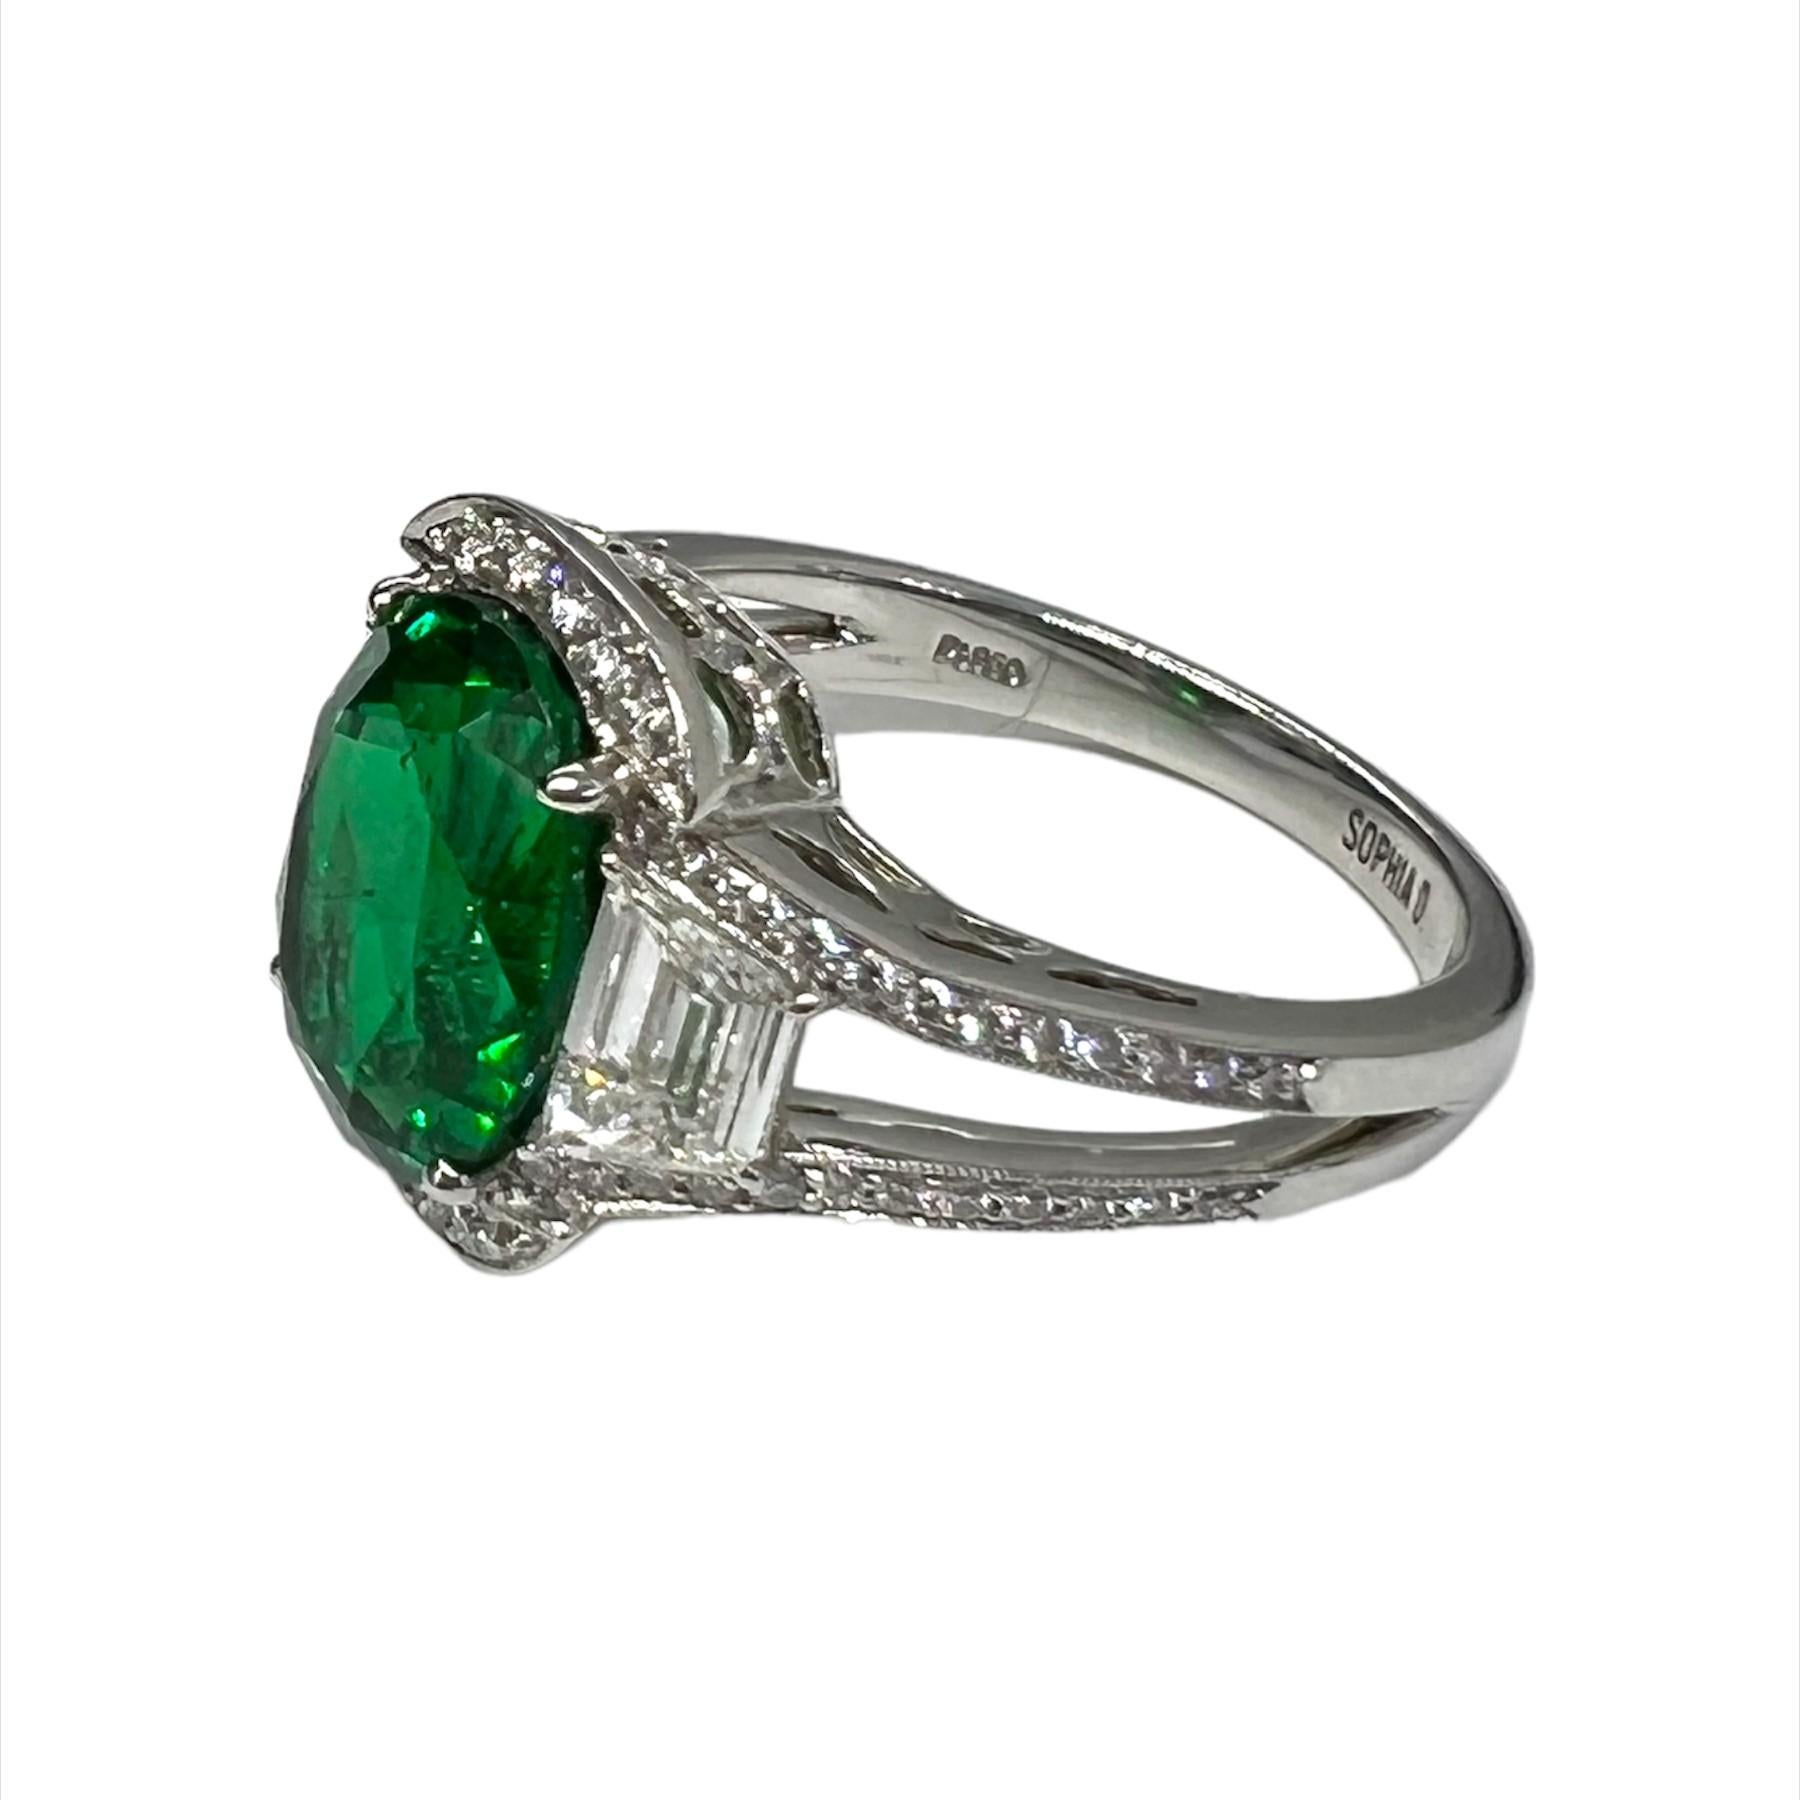 Designed and created by Sophia D., this ring in platinum setting features a round emerald that weighs 3.69 carats and is accentuated  with 0.54 carats and 0.25 carats of diamonds.  

Sophia D by Joseph Dardashti LTD has been known worldwide for 35